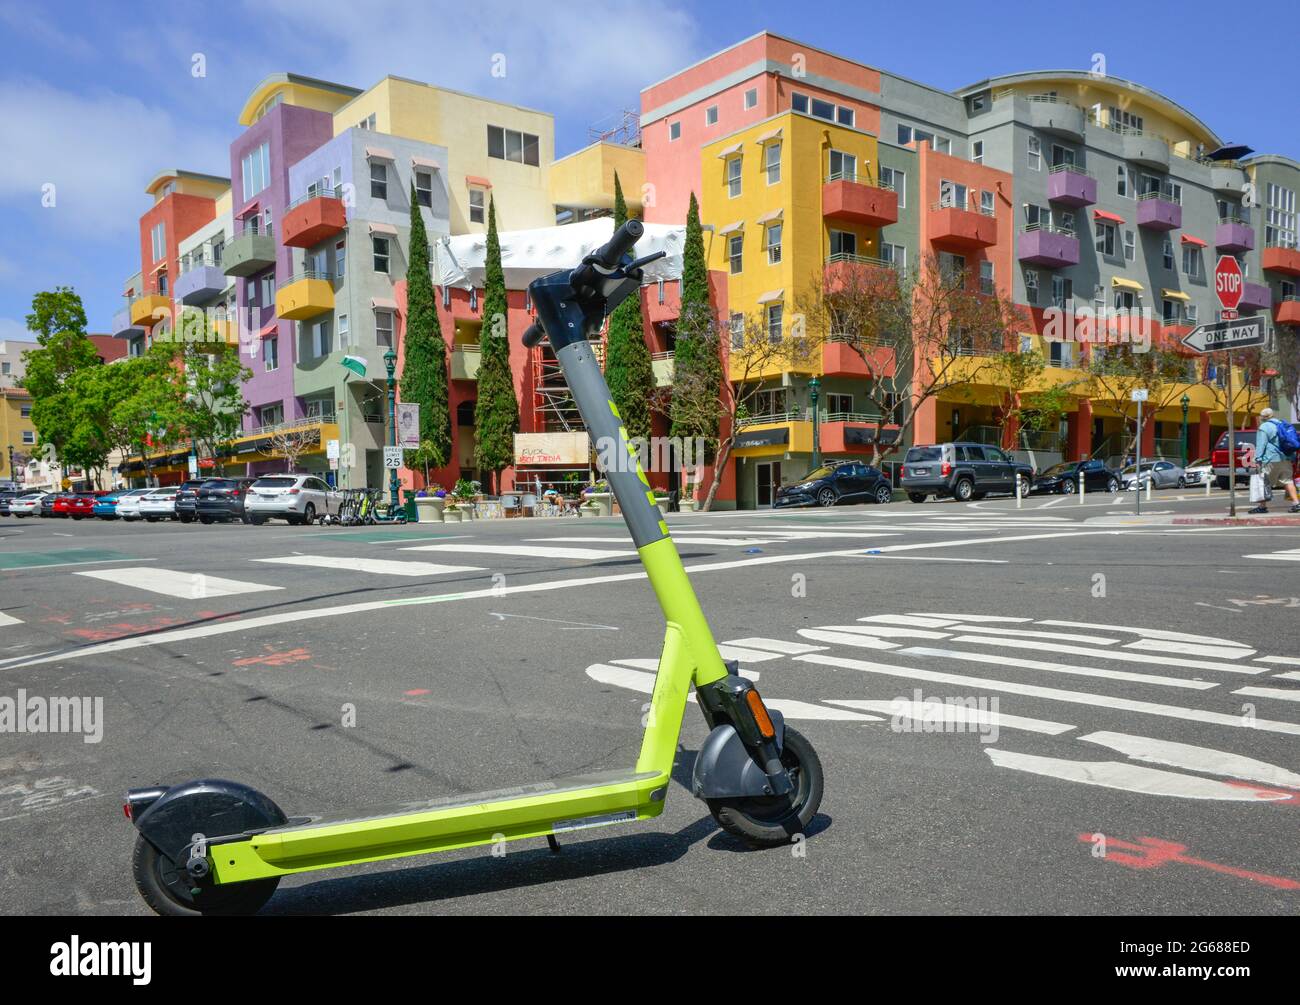 A lime colored app-based rental scooter parked across from the modern San Diego Village Walk Condominiums, India Street in Little Italy, San Diego, CA Stock Photo